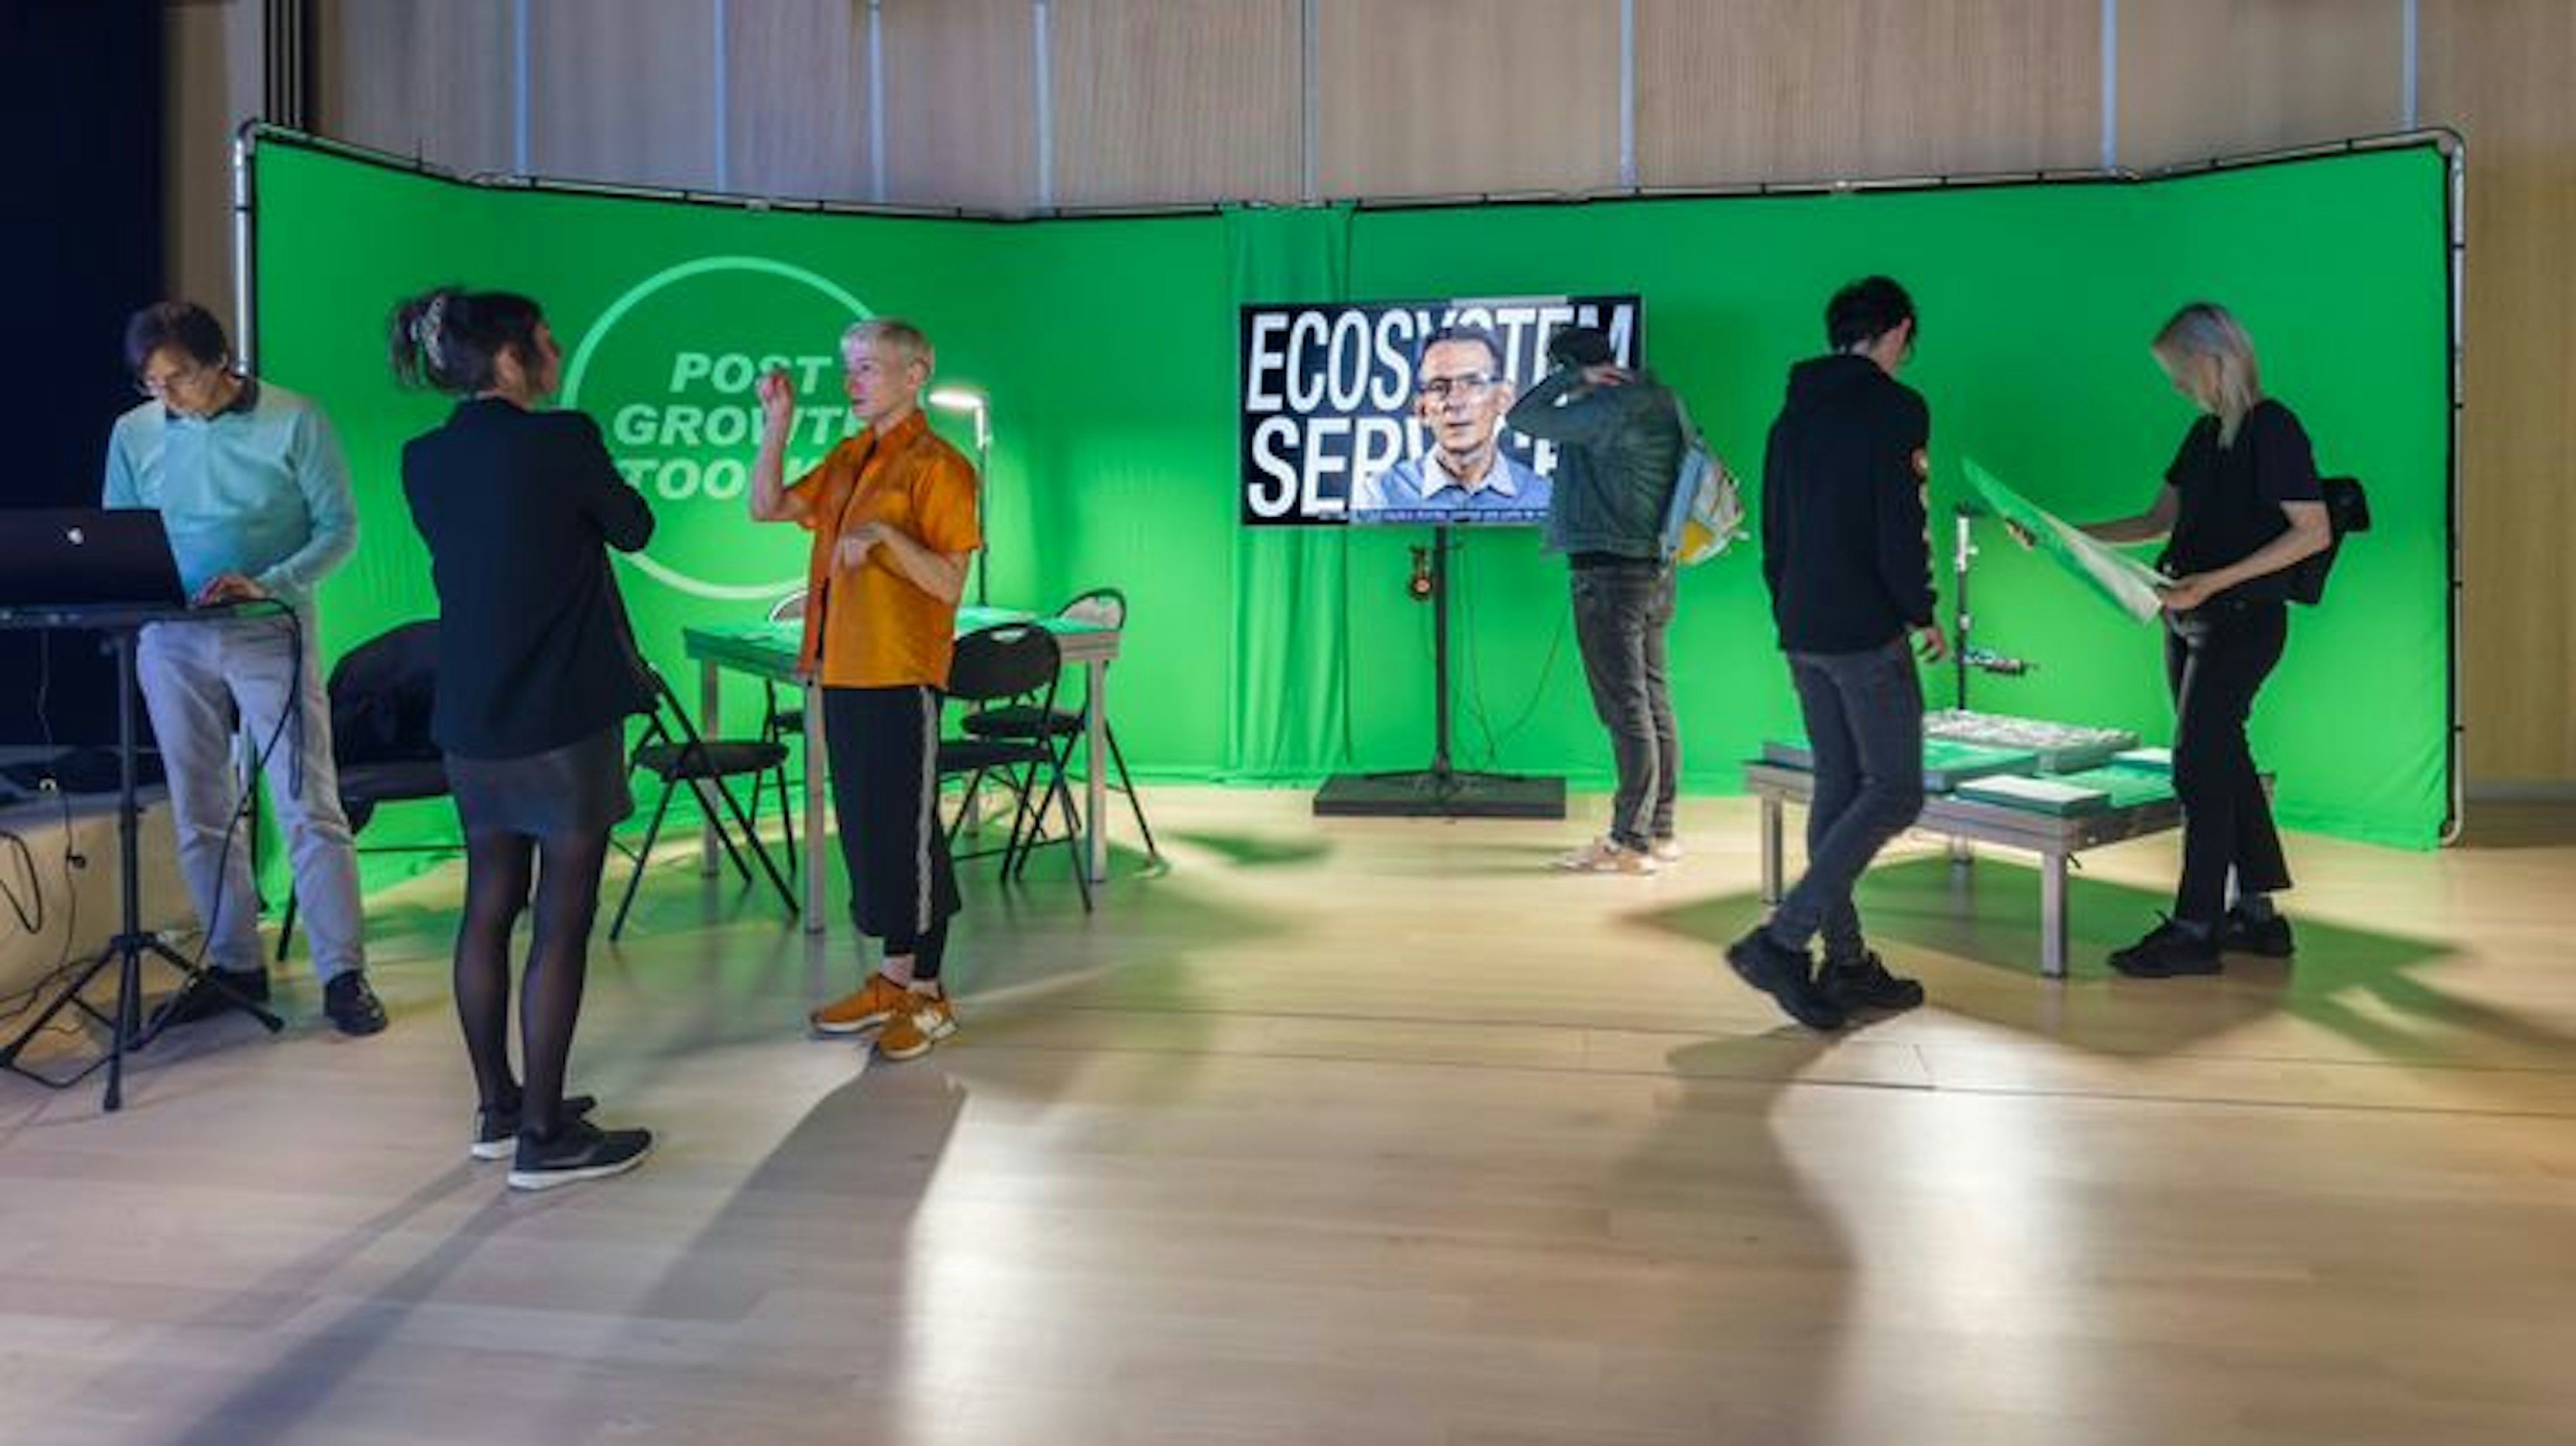 Group of people standing in front of a green screen participating in various activities; conversing, looking at a tv screen, laptop and sheets of paper. 